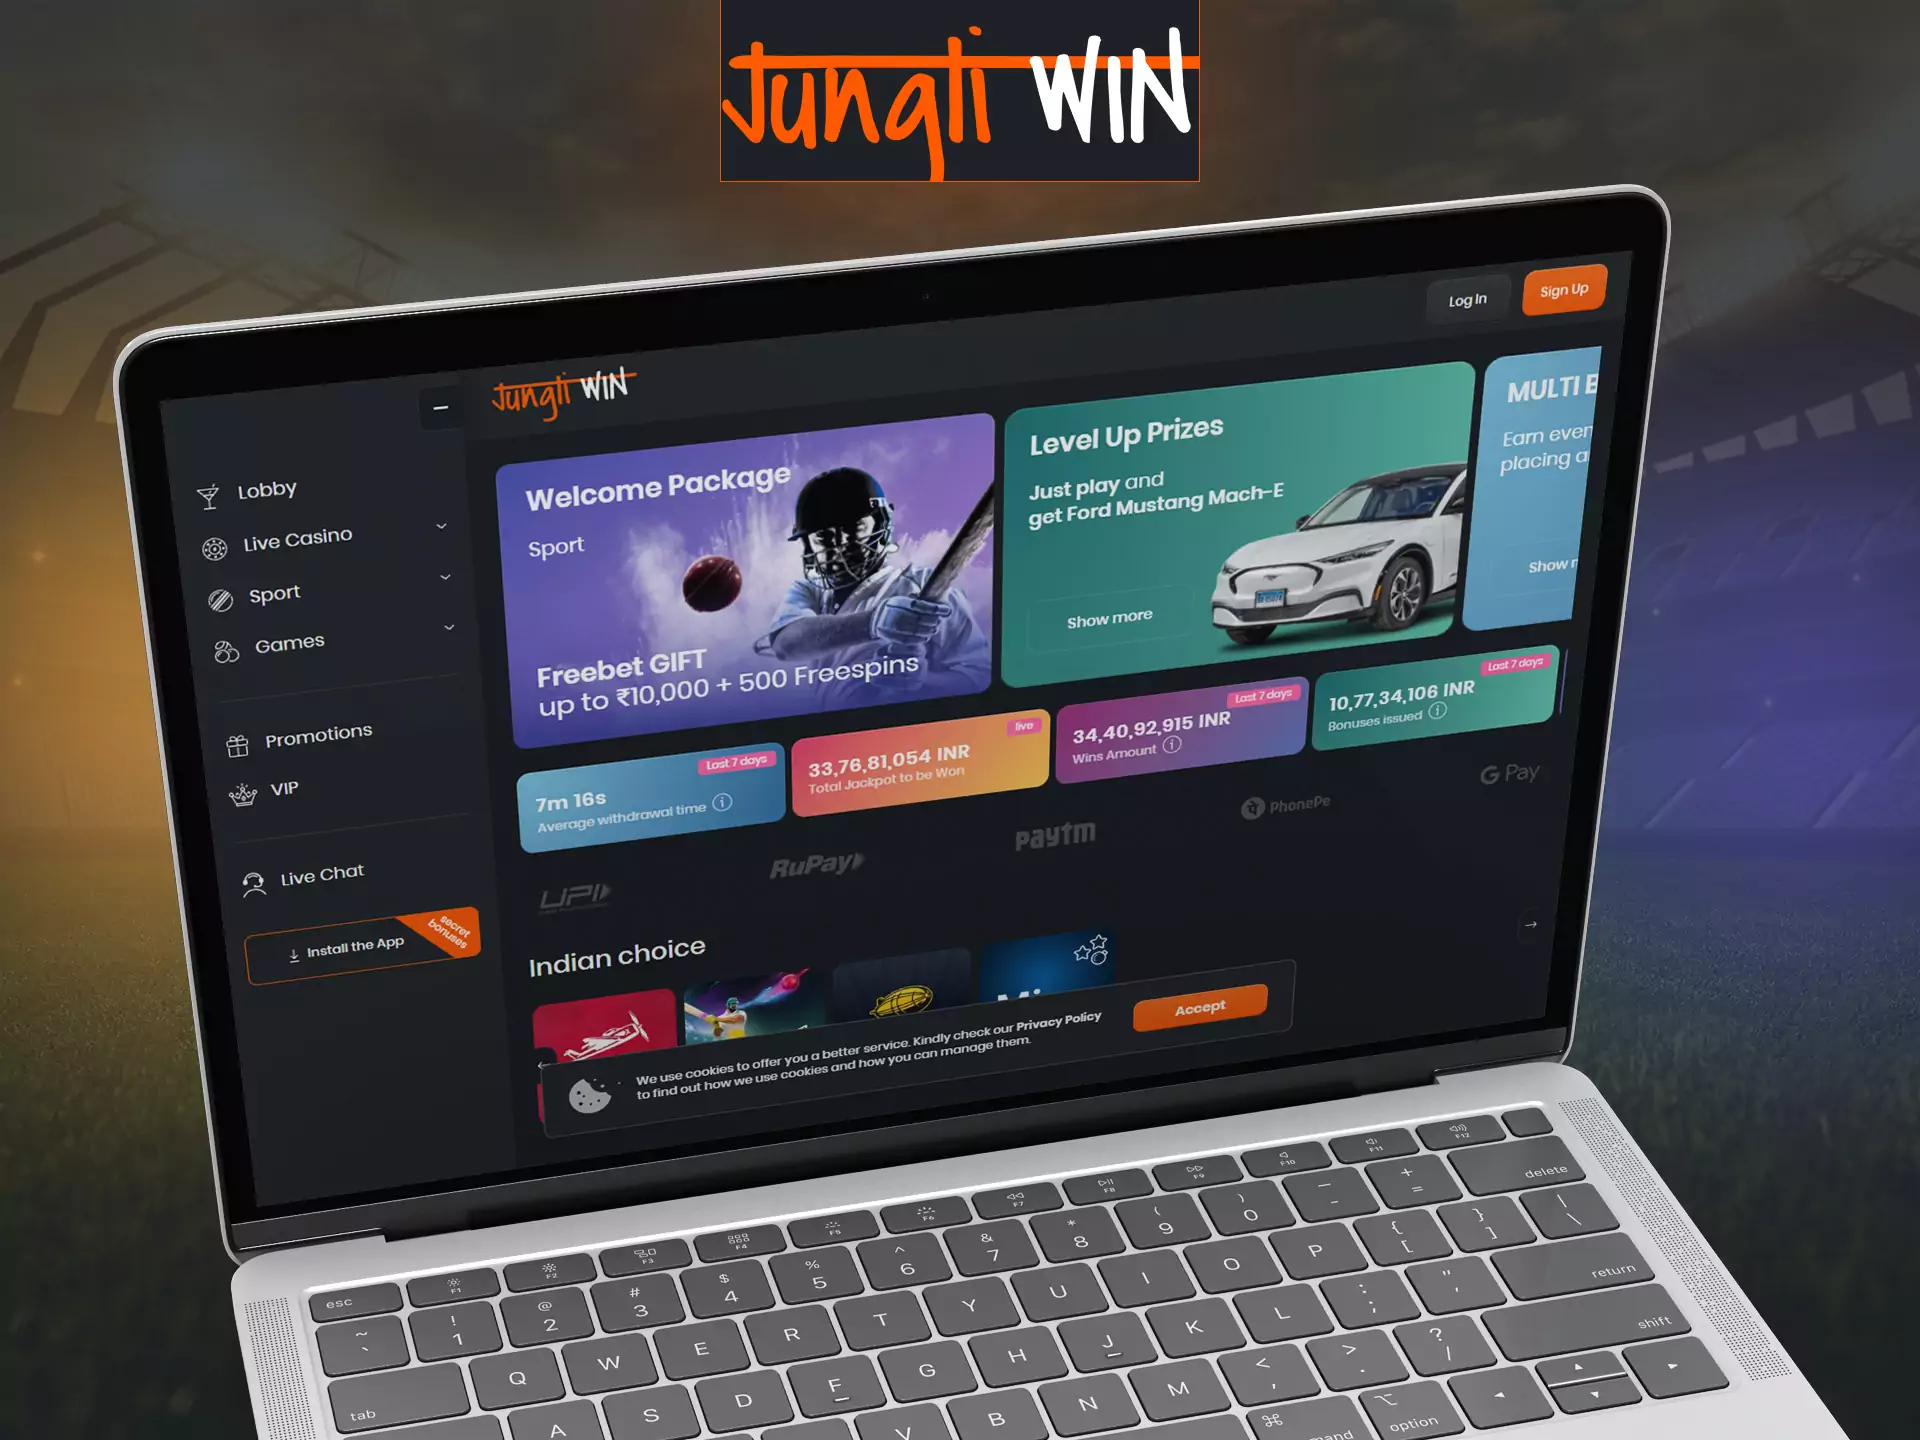 Place bets and play Jungliwin on your personal computer.